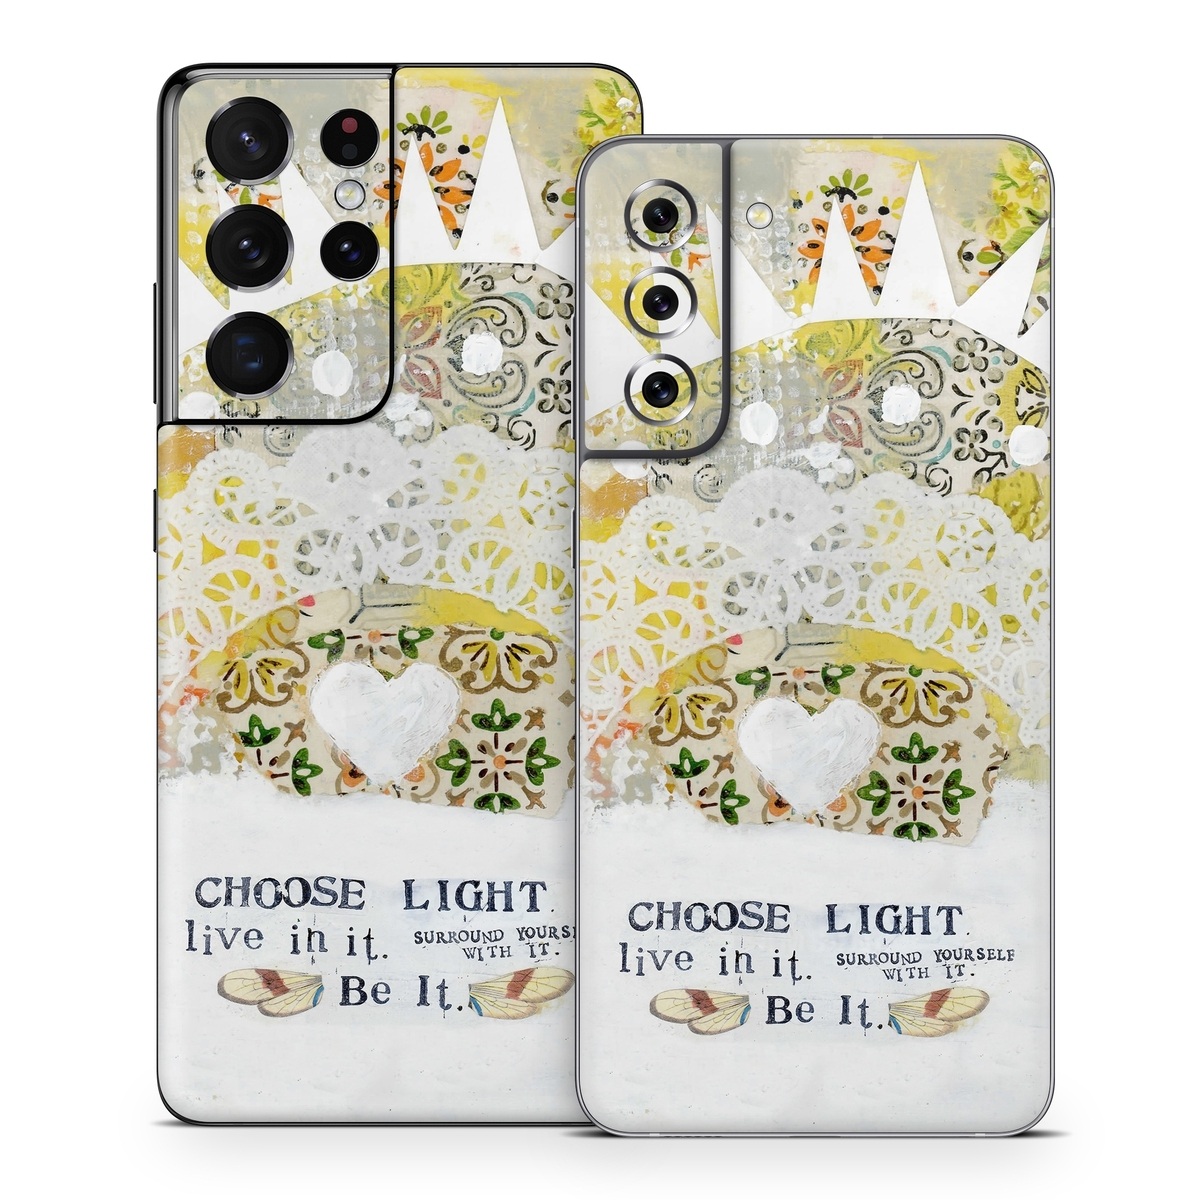 Samsung Galaxy S21 Series Skin design of Font, Greeting card, with yellow, white, green, orange, red, black colors